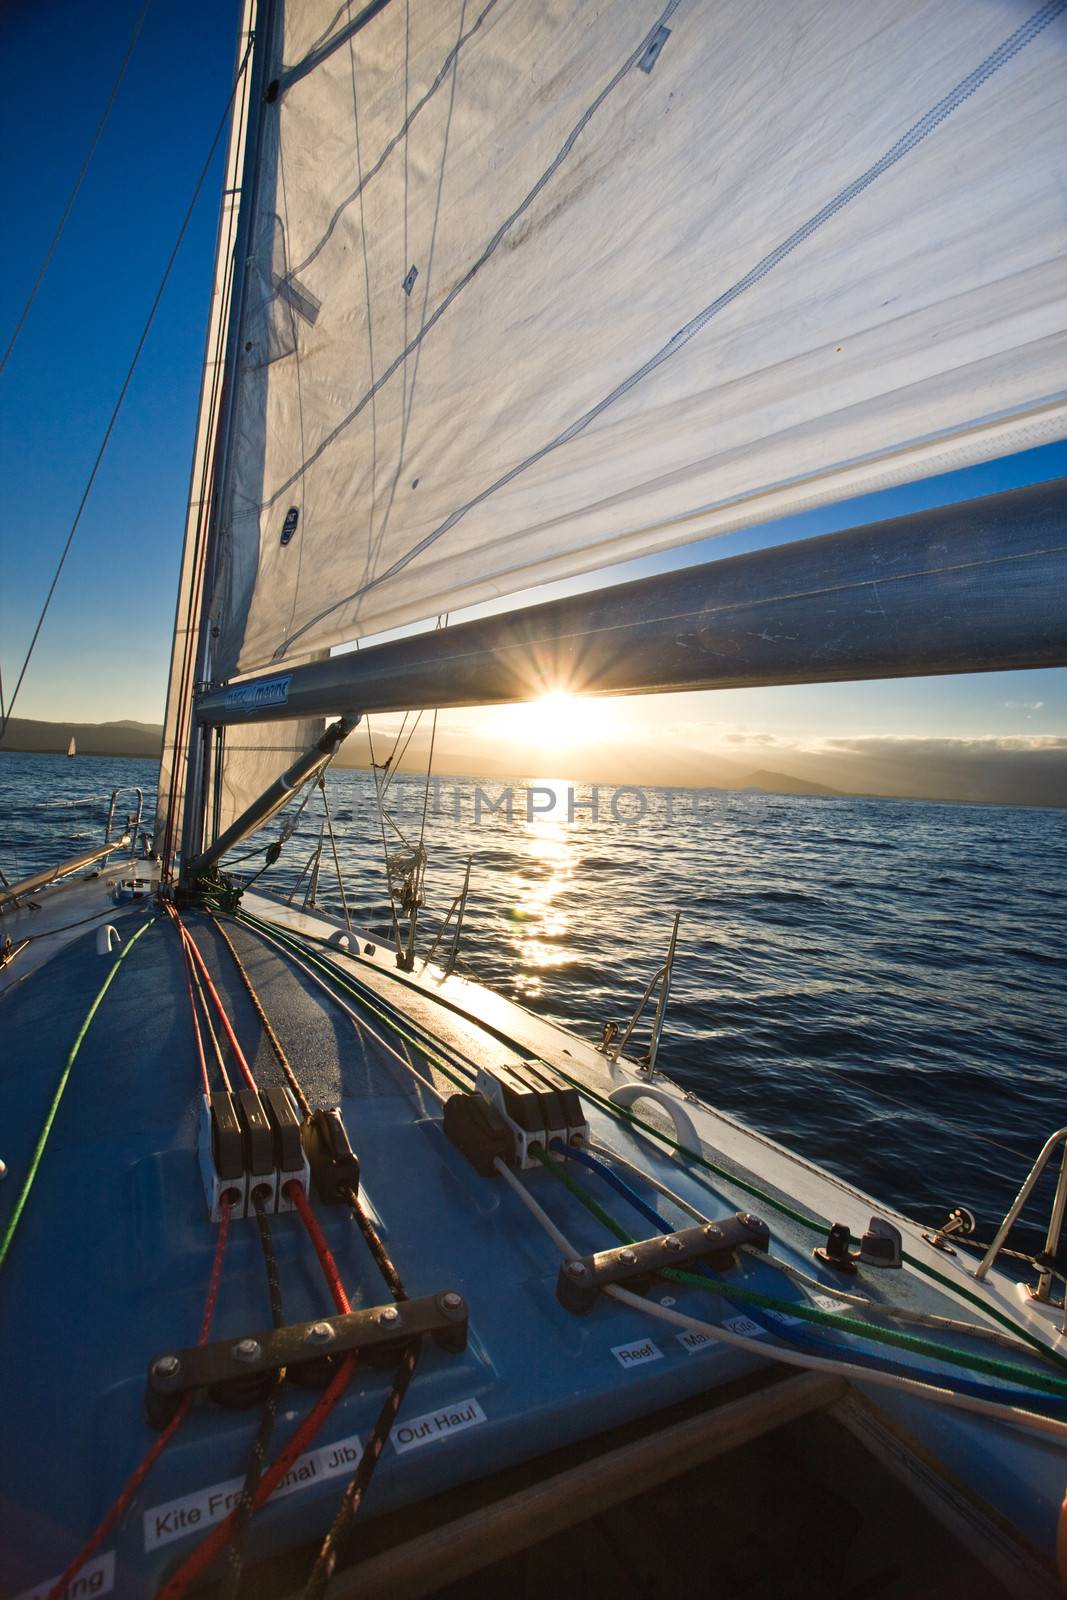 Sunset from the deck of a yacht with the sun just dipping towards the horizon under the sail of the boat